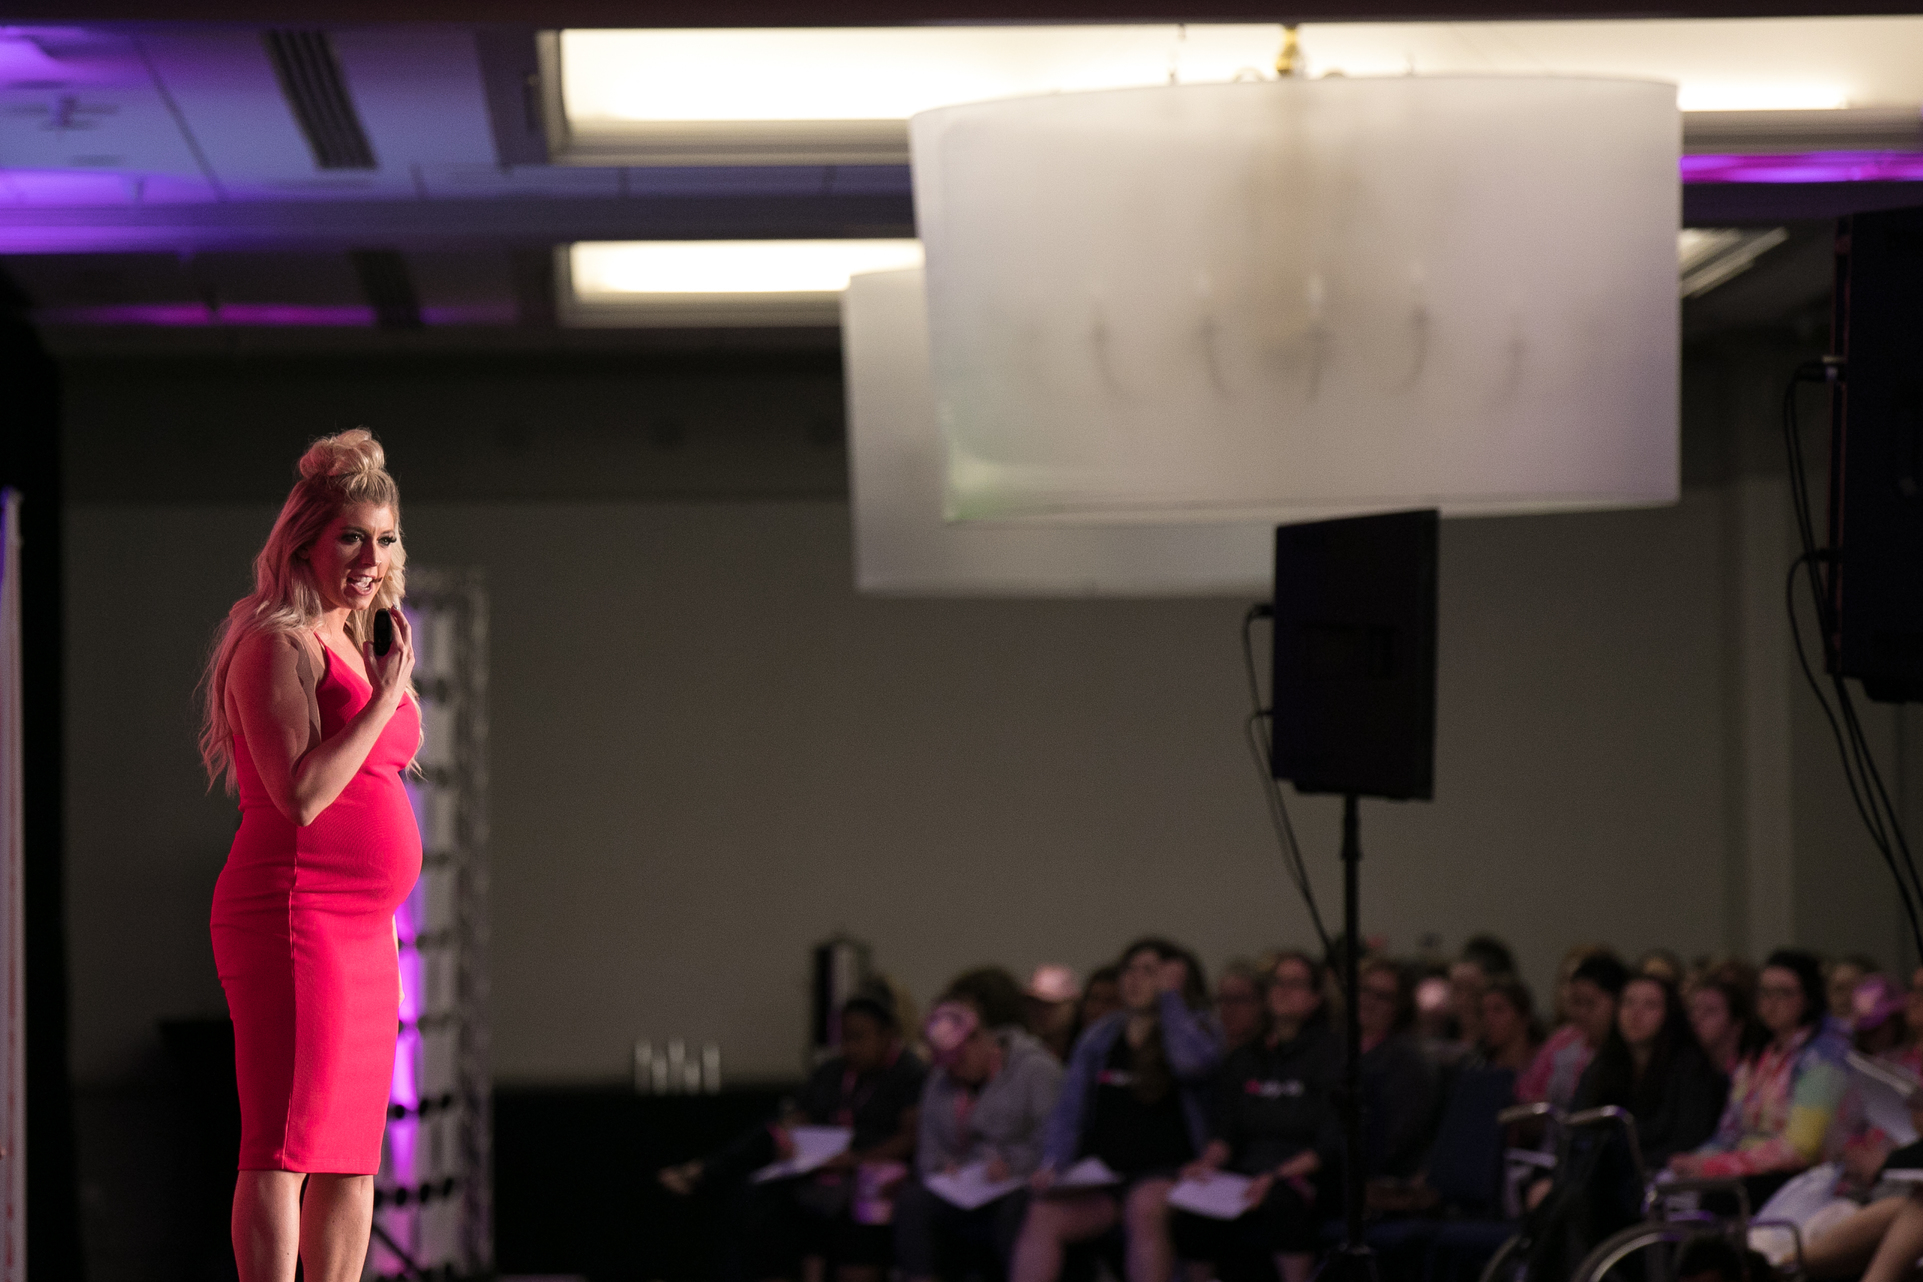 LadyBoss Chief Marketing Officer and co-founder, Kaelin Poulin, speaking to a sold out crowd at LadyBoss LIVE 2018 in Nashville Tennessee.